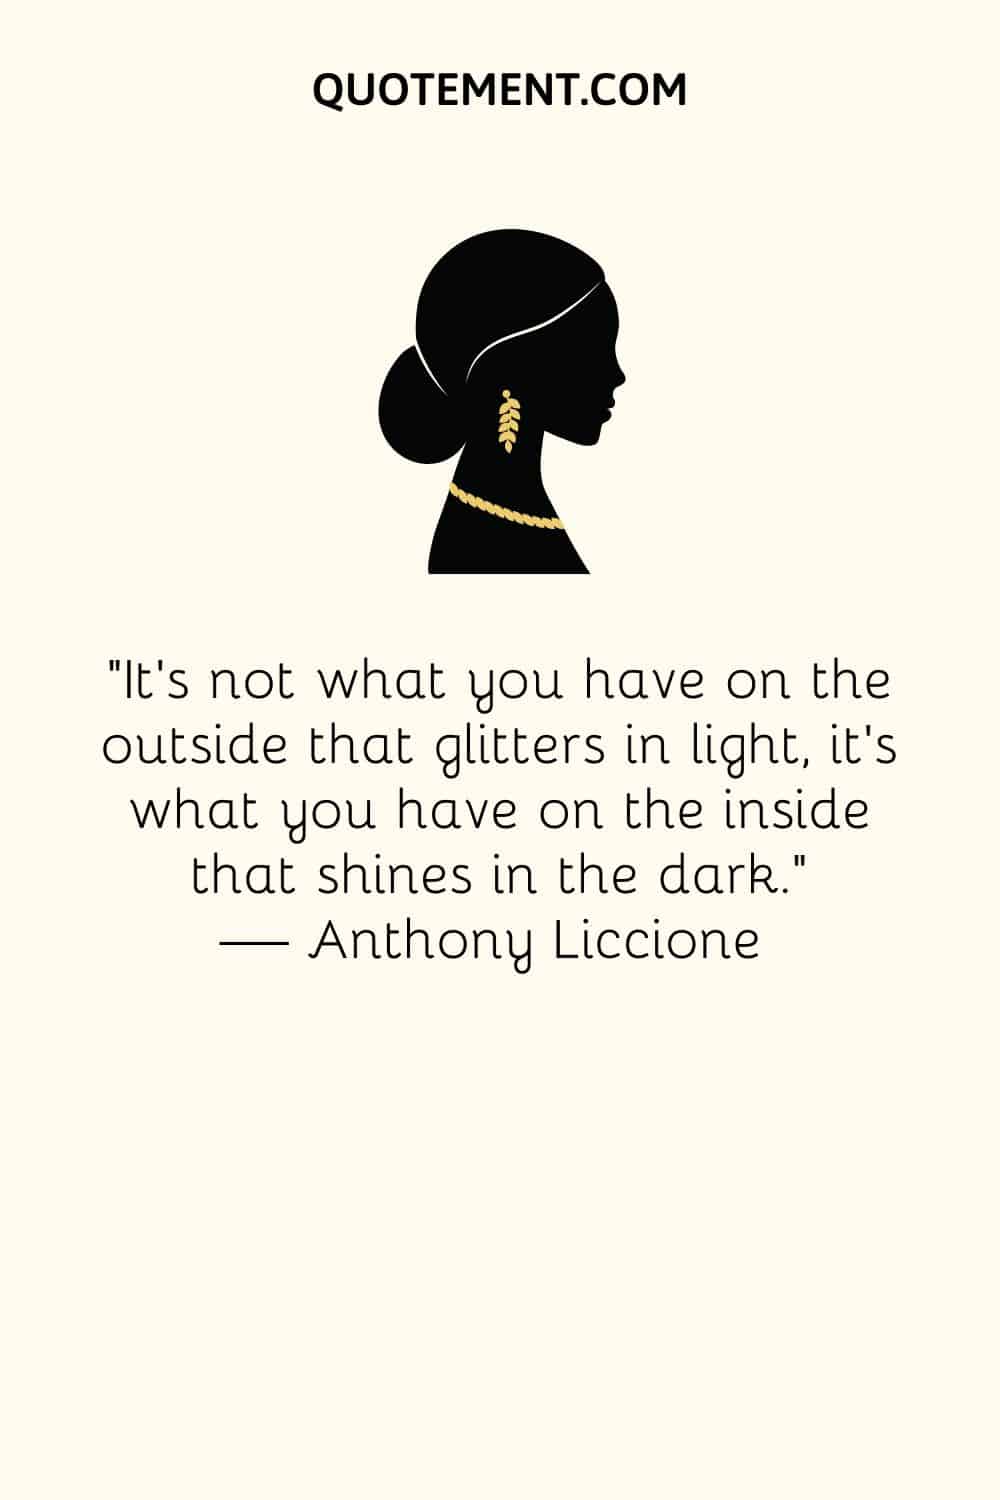 It's not what you have on the outside that glitters in light, it's what you have on the inside that shines in the dark